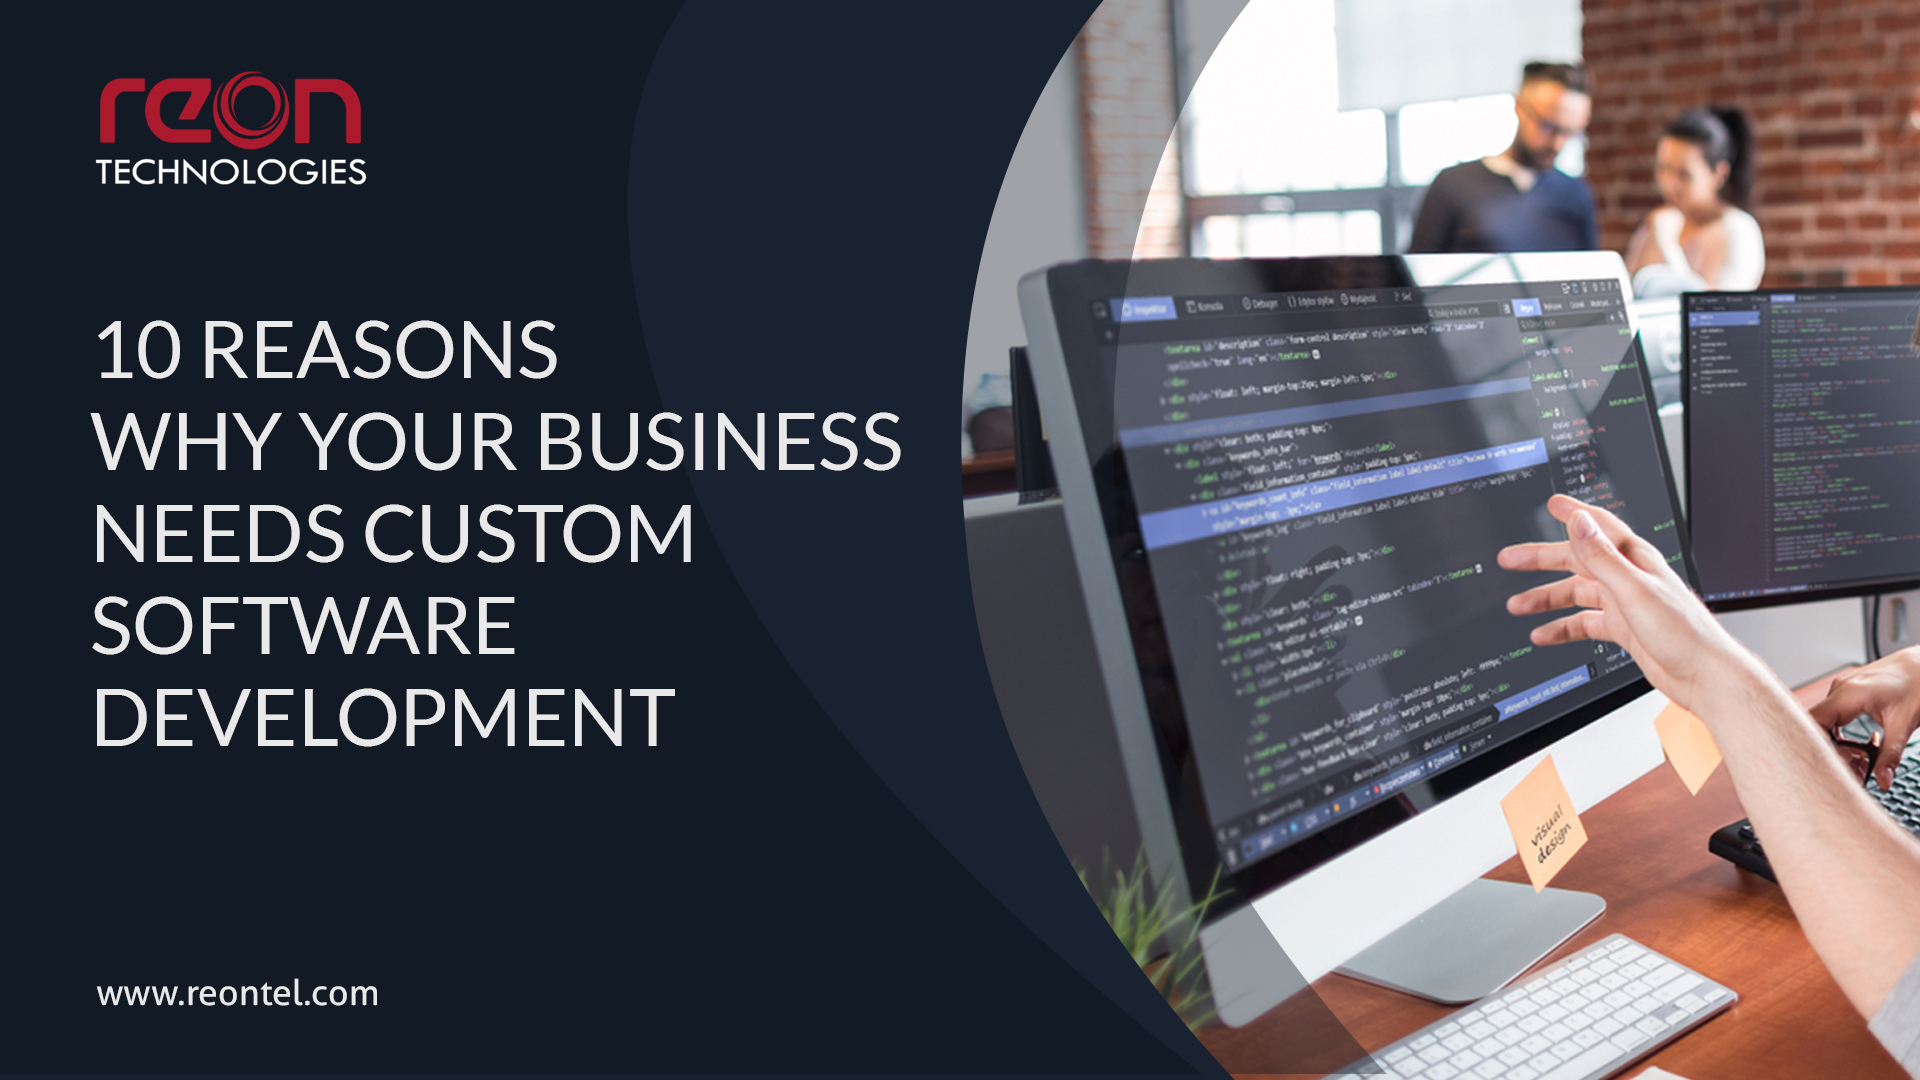 Reasons for you business custom software development services